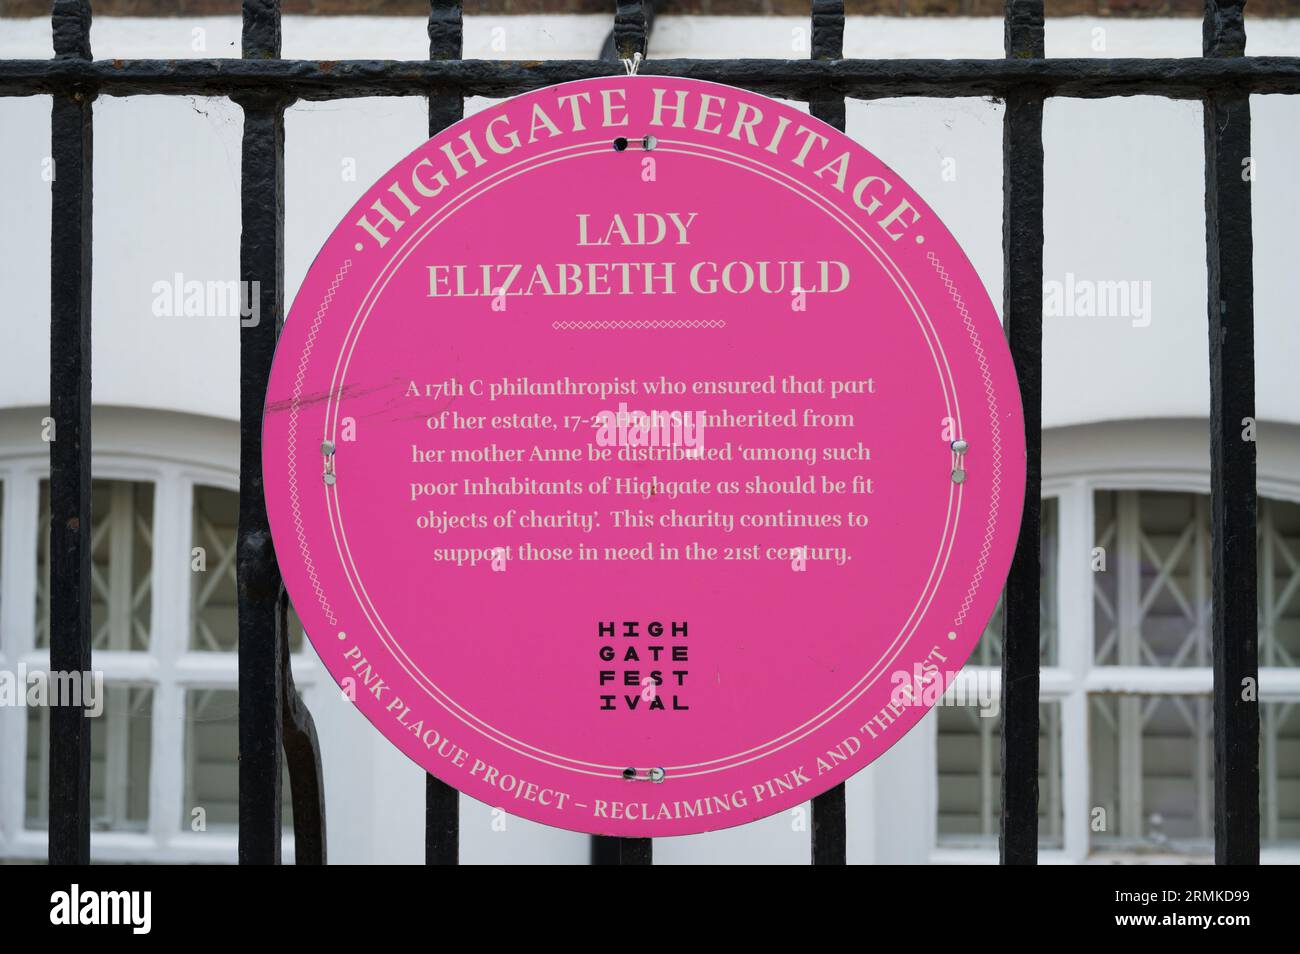 Highgate Pink Plaques Project honouring the lives of notable Highgate women. Highgate, London N6 England, UK Stock Photo